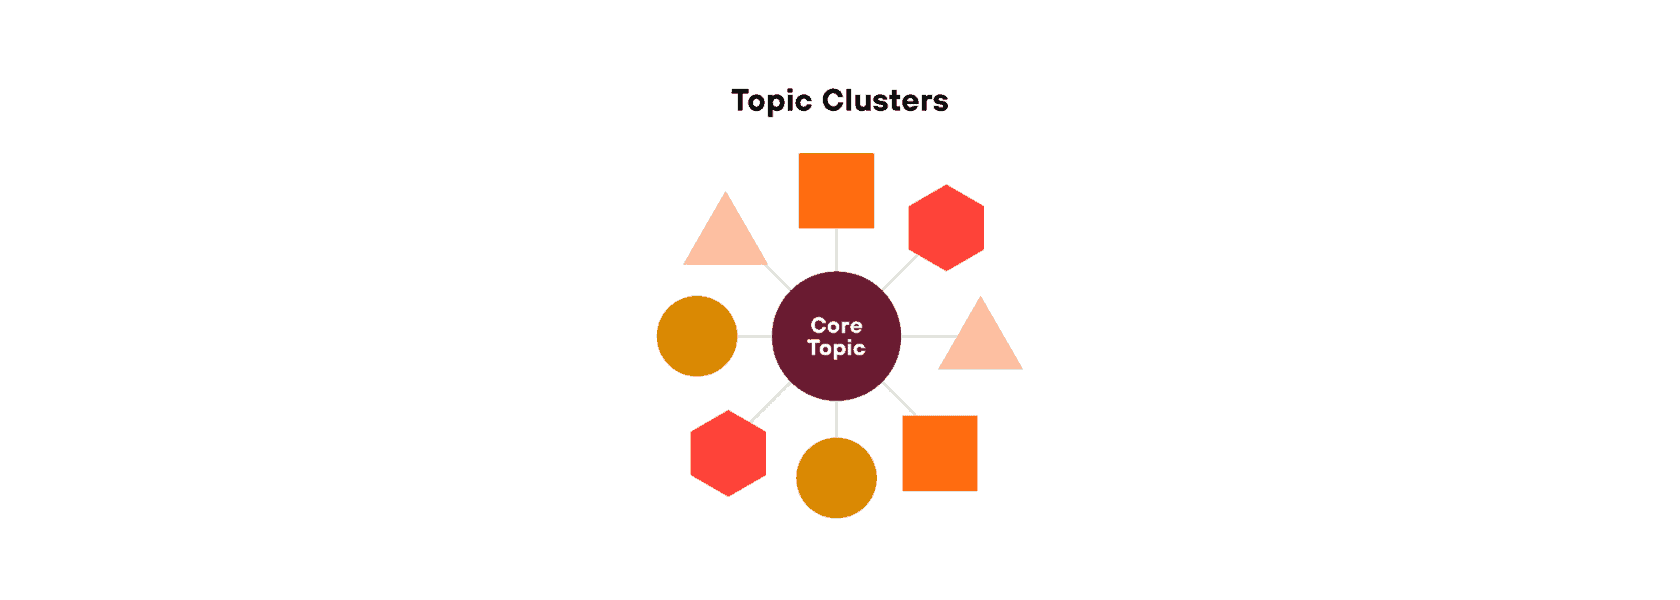 Diagram showing topic clusters